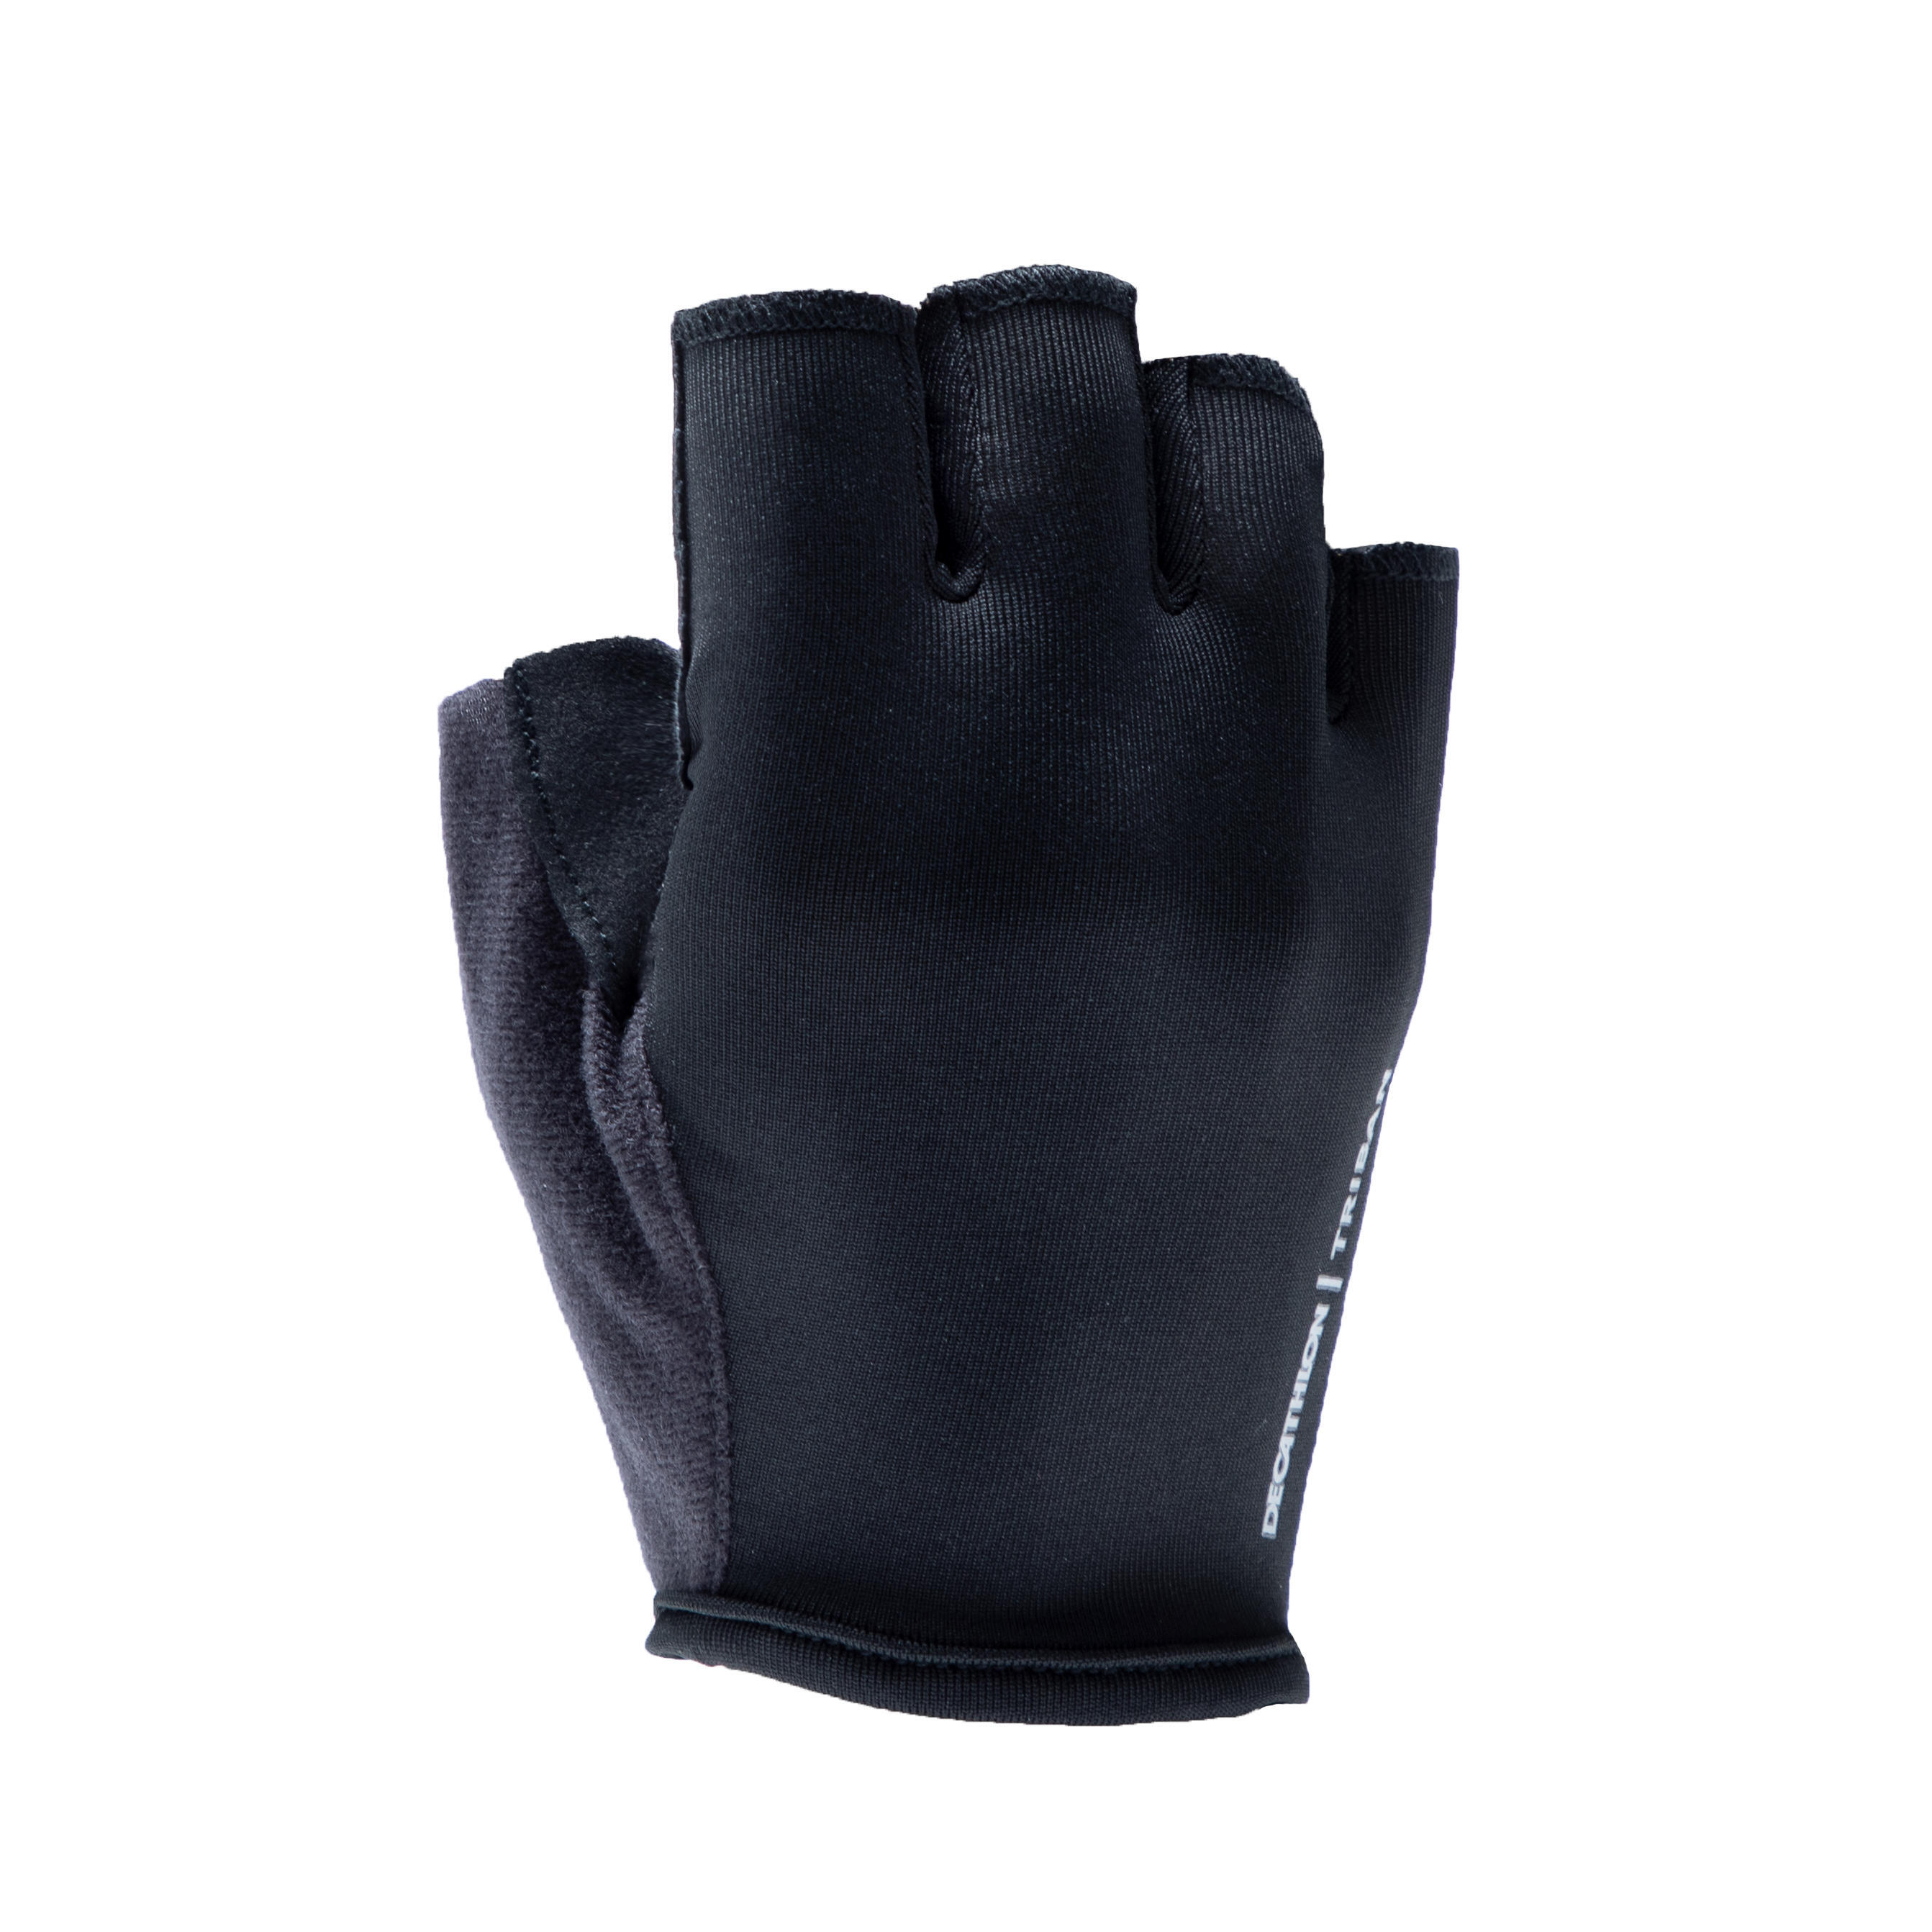 Road Cycling Cycle Touring Gloves 100 - Black 1/5